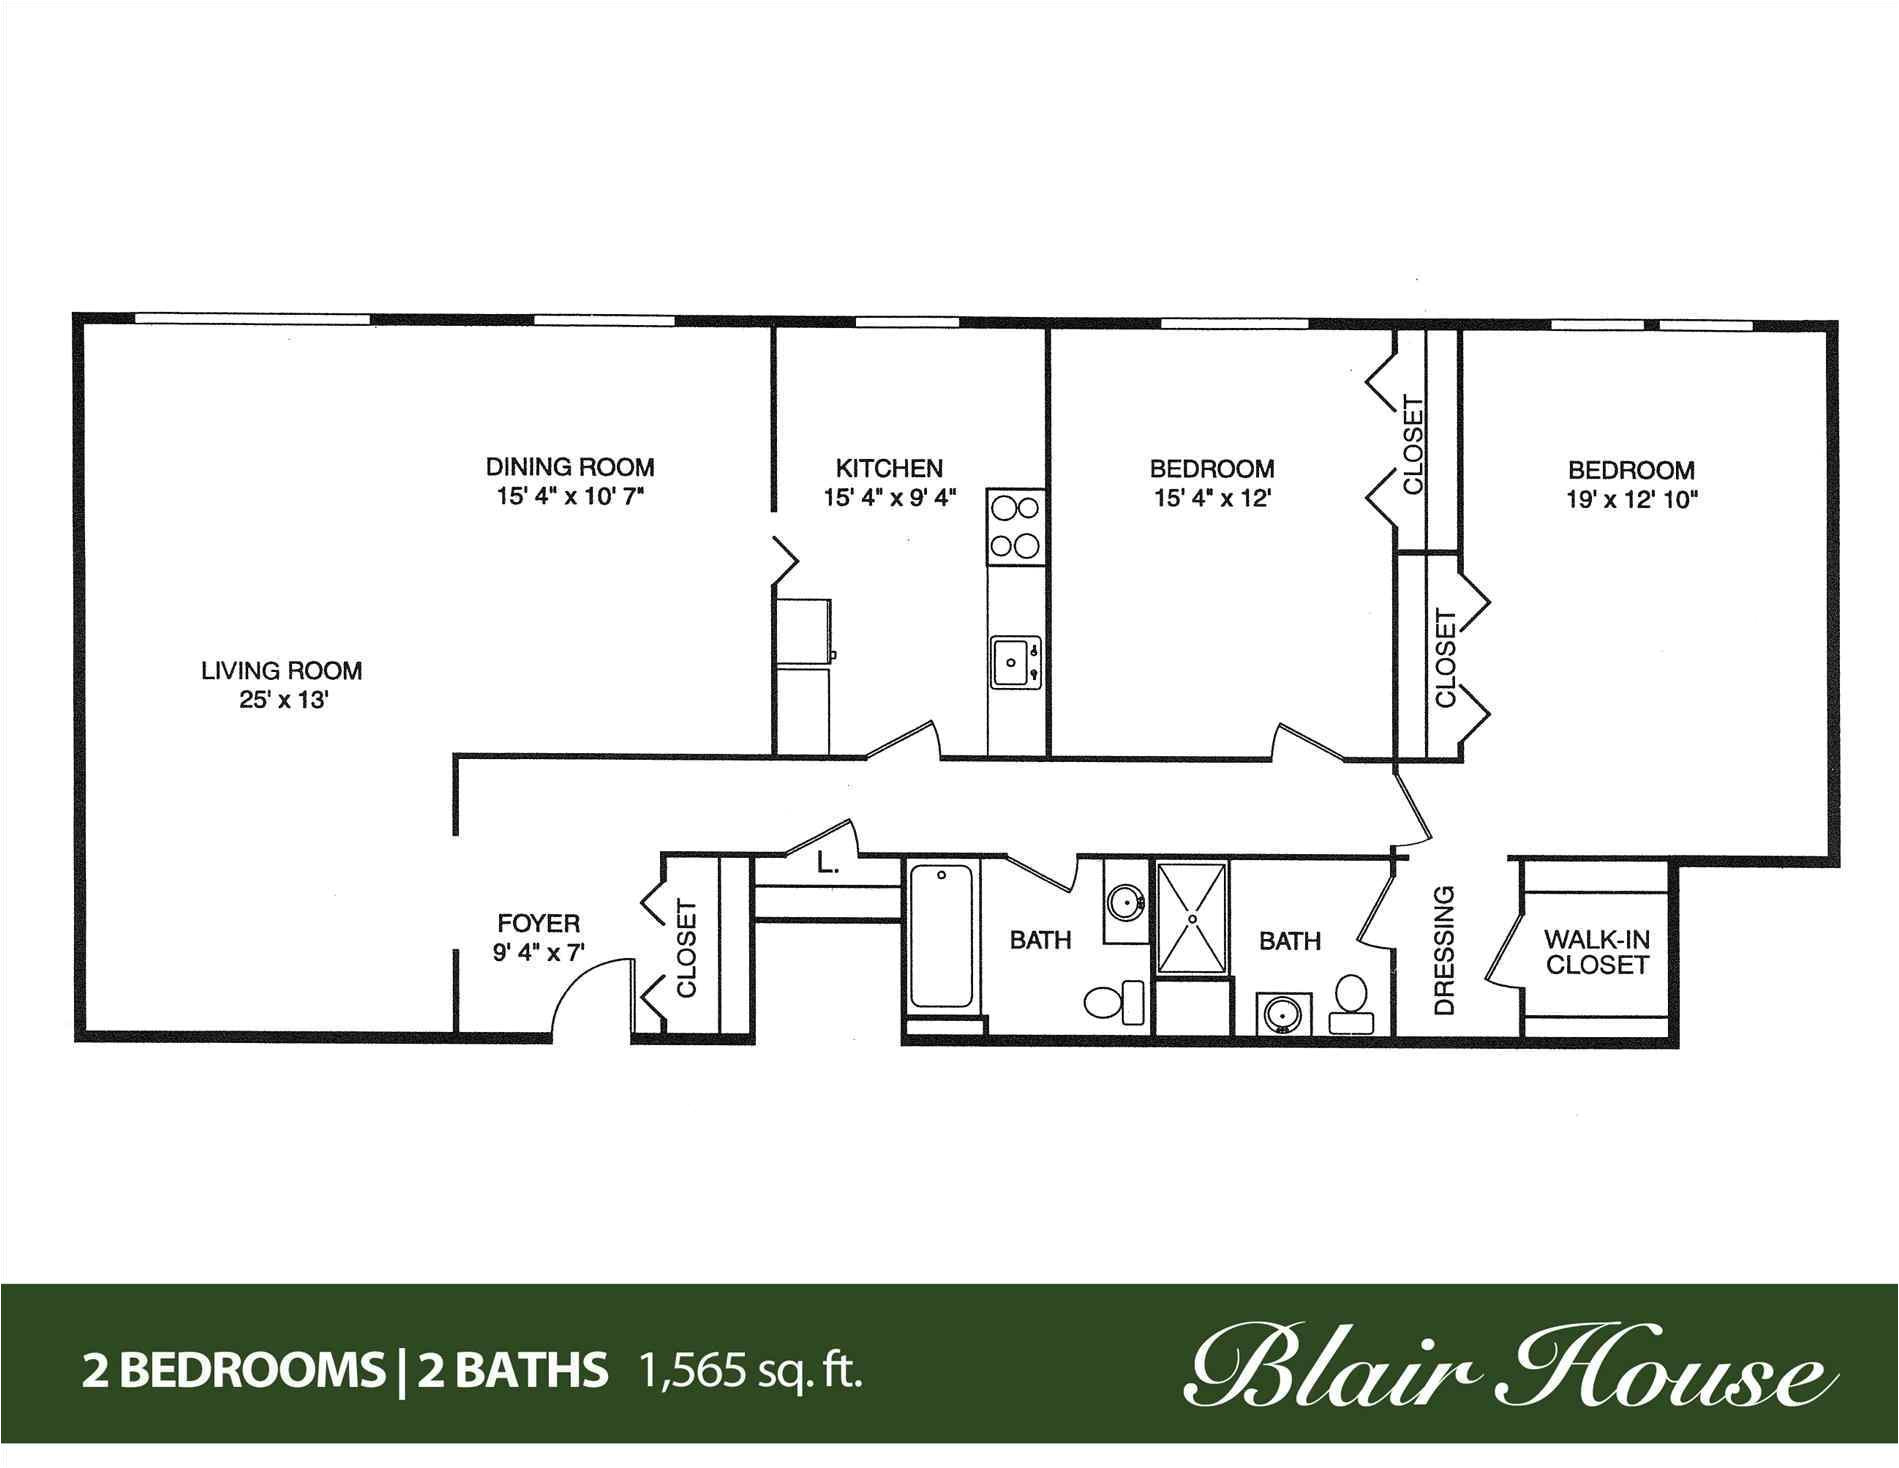 plans small apartment floor remodel plan floor 1 bedroom tiny house plans plan awesome low cost small about remodel interior awesome 1 bedroom tiny jpg